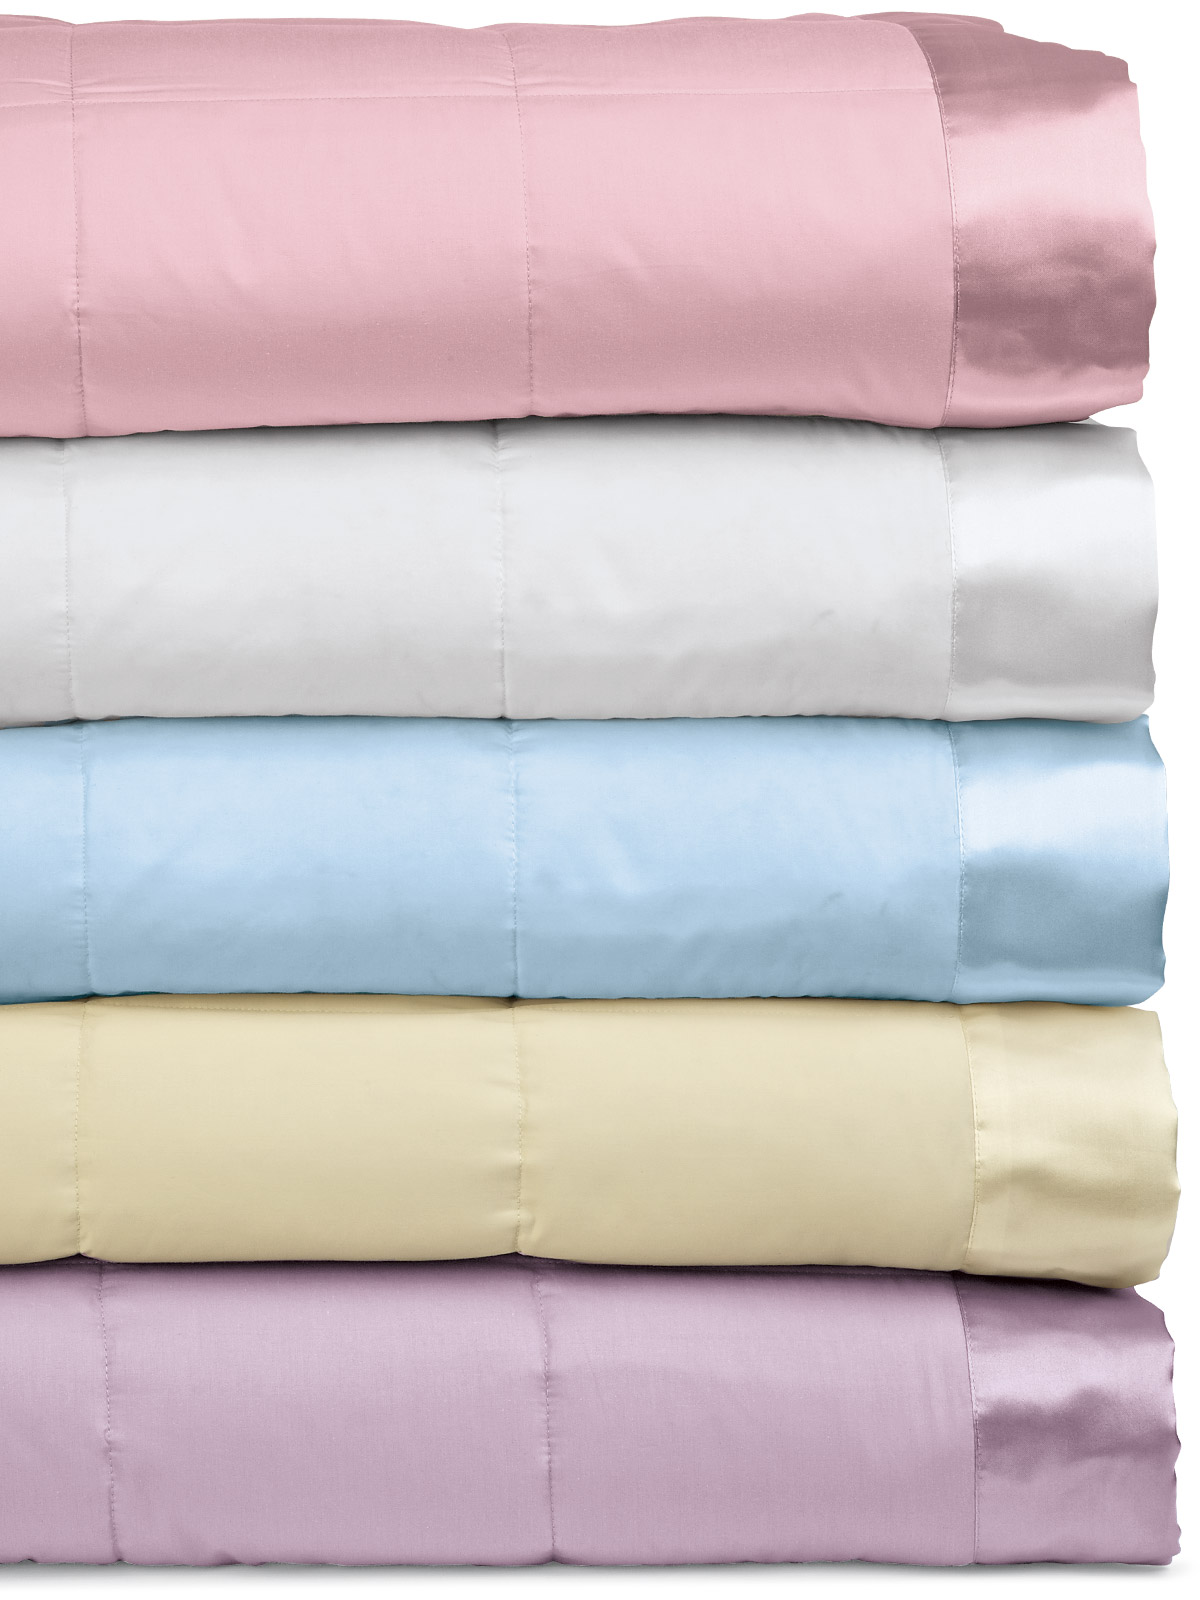 Image of Imperial Down Blankets in array of colors